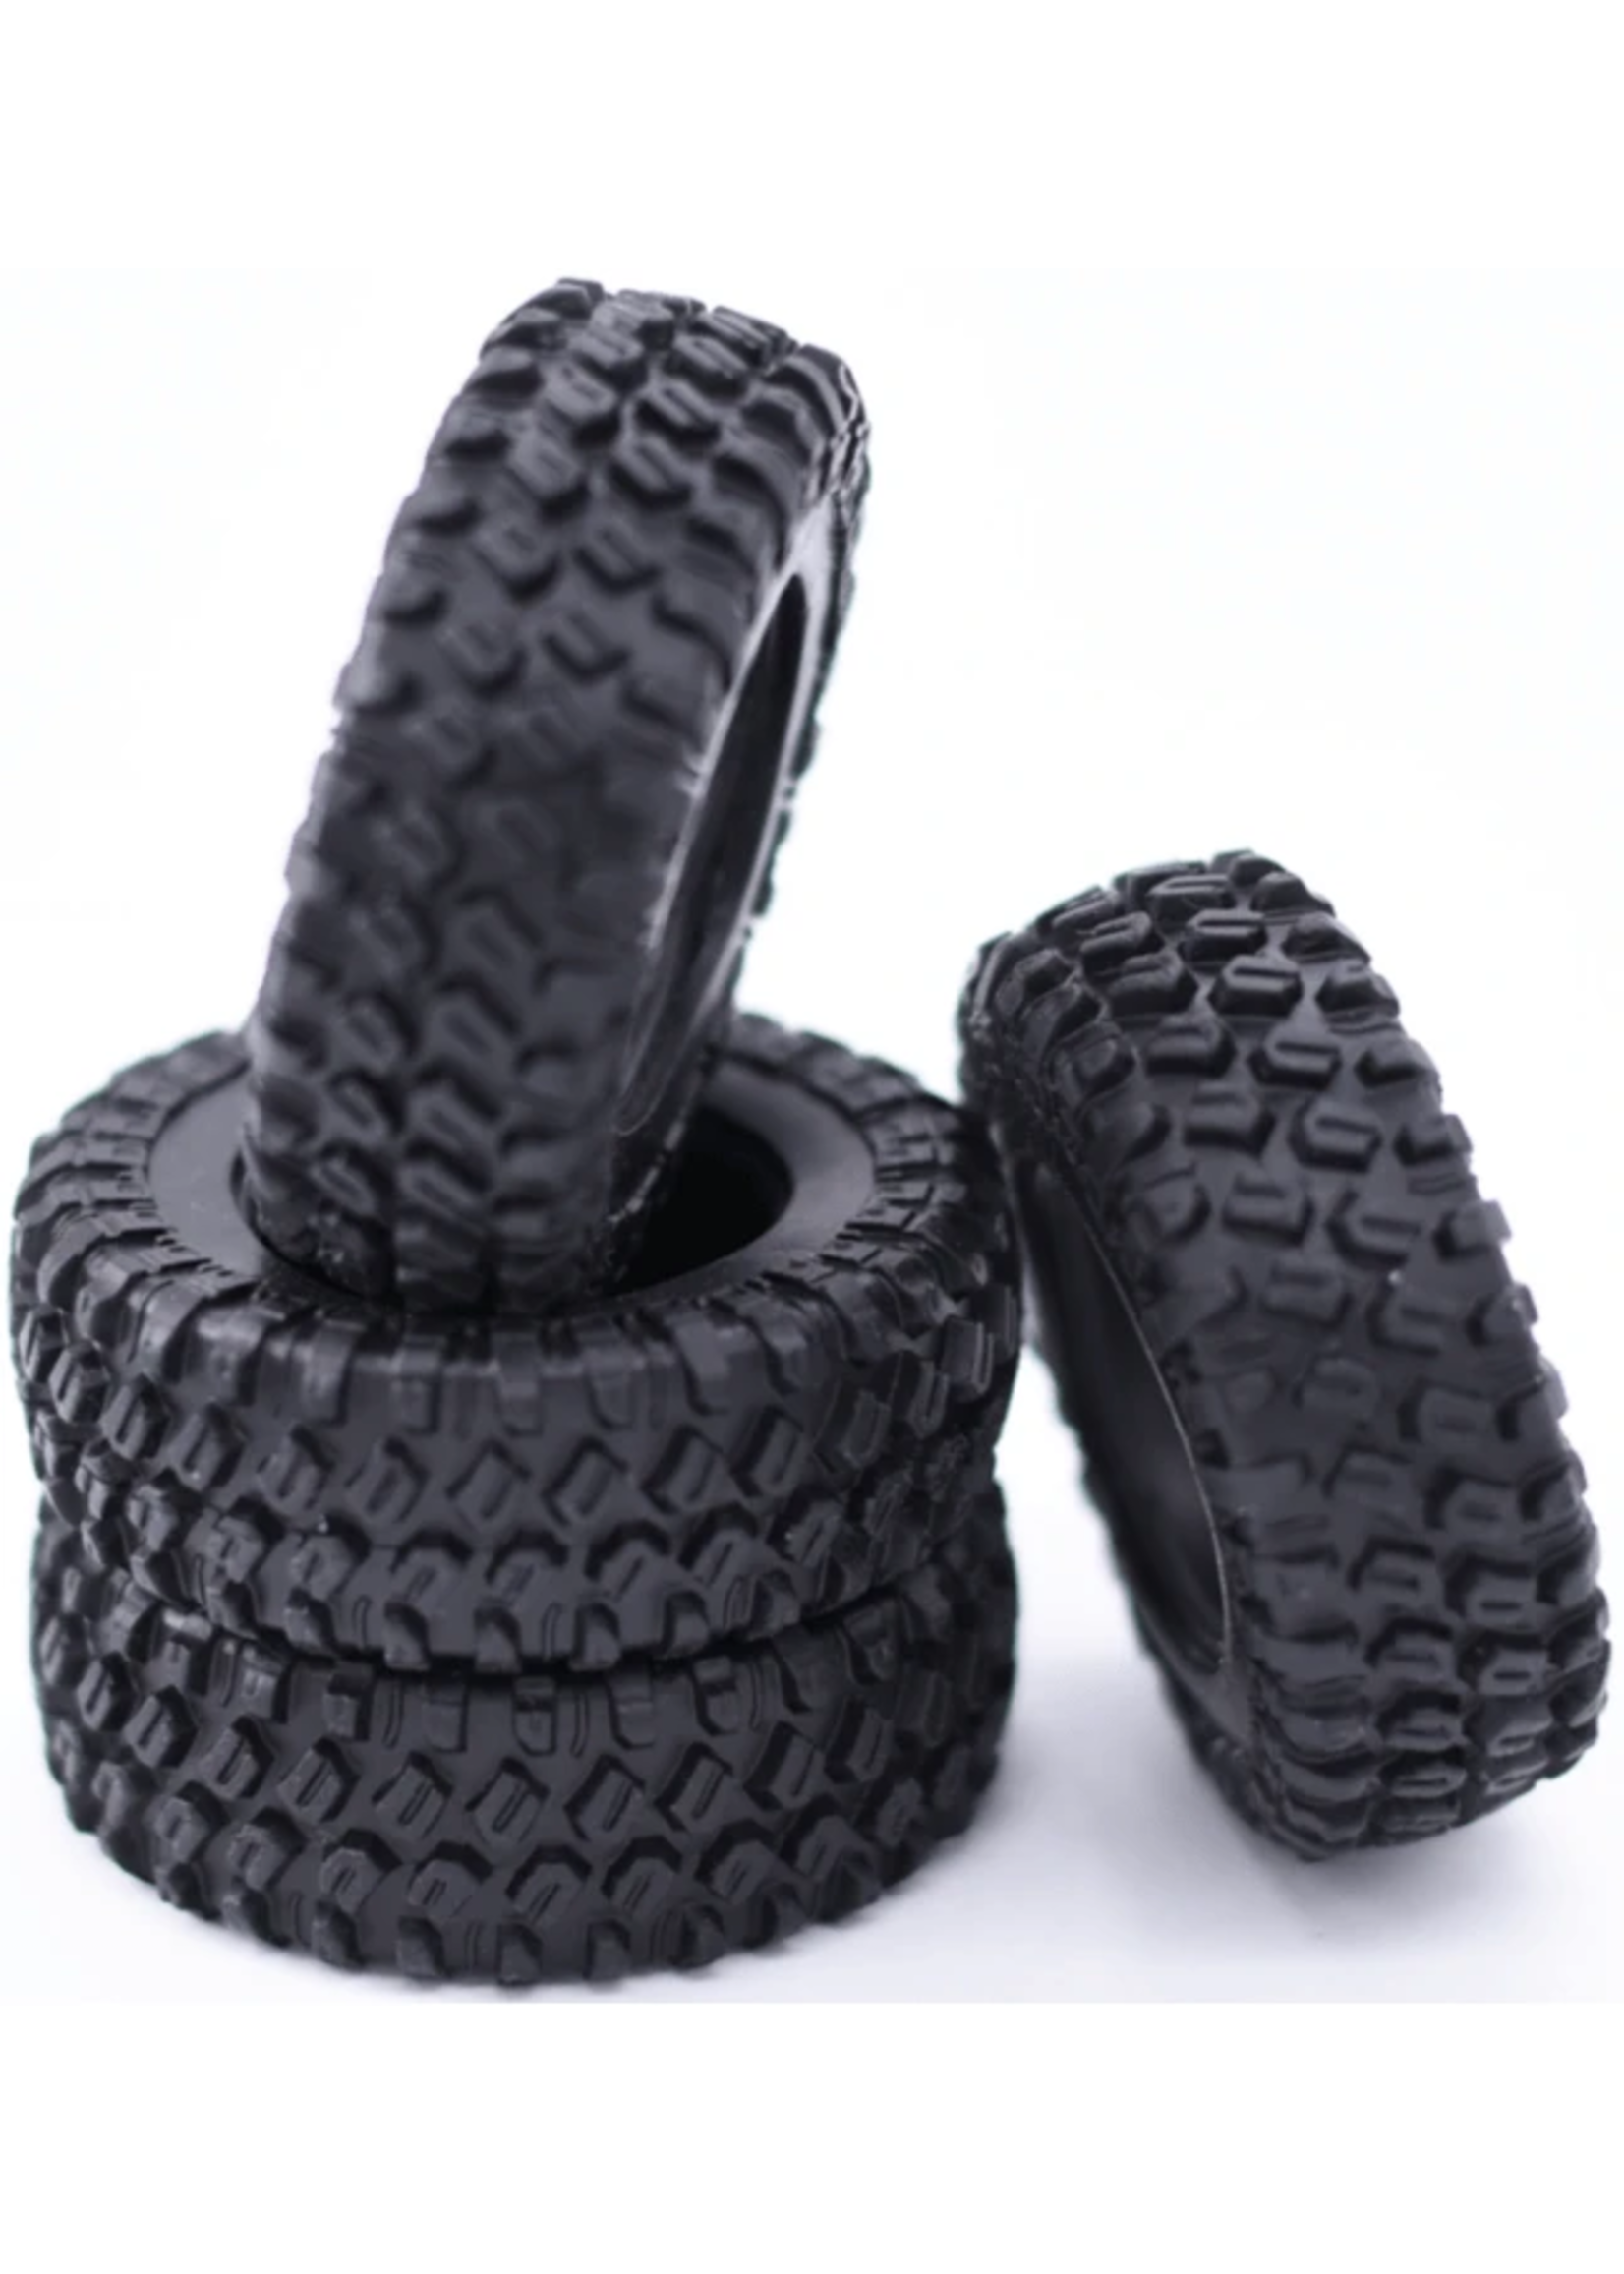 Hobby Details DTSCX24-51 Hobby Details C STYLE 1.0 Micro Tires with Foam 4pc Set